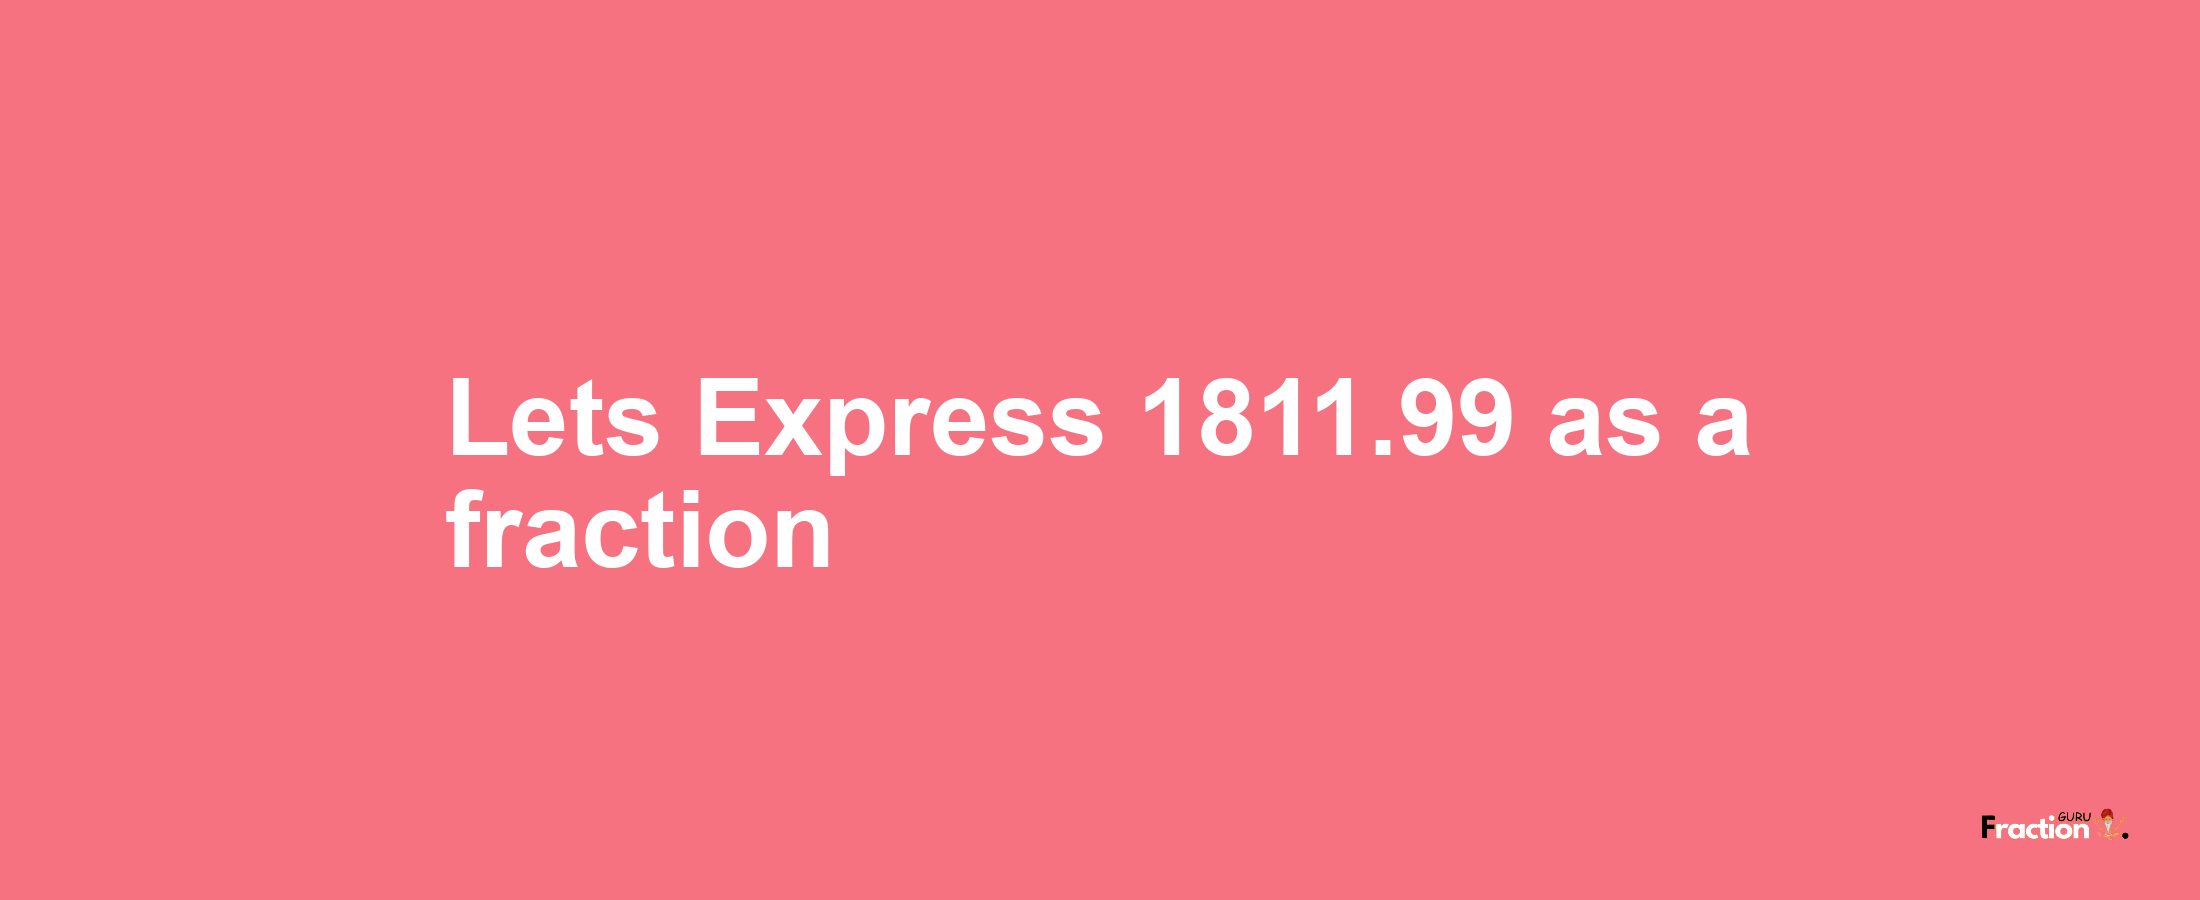 Lets Express 1811.99 as afraction